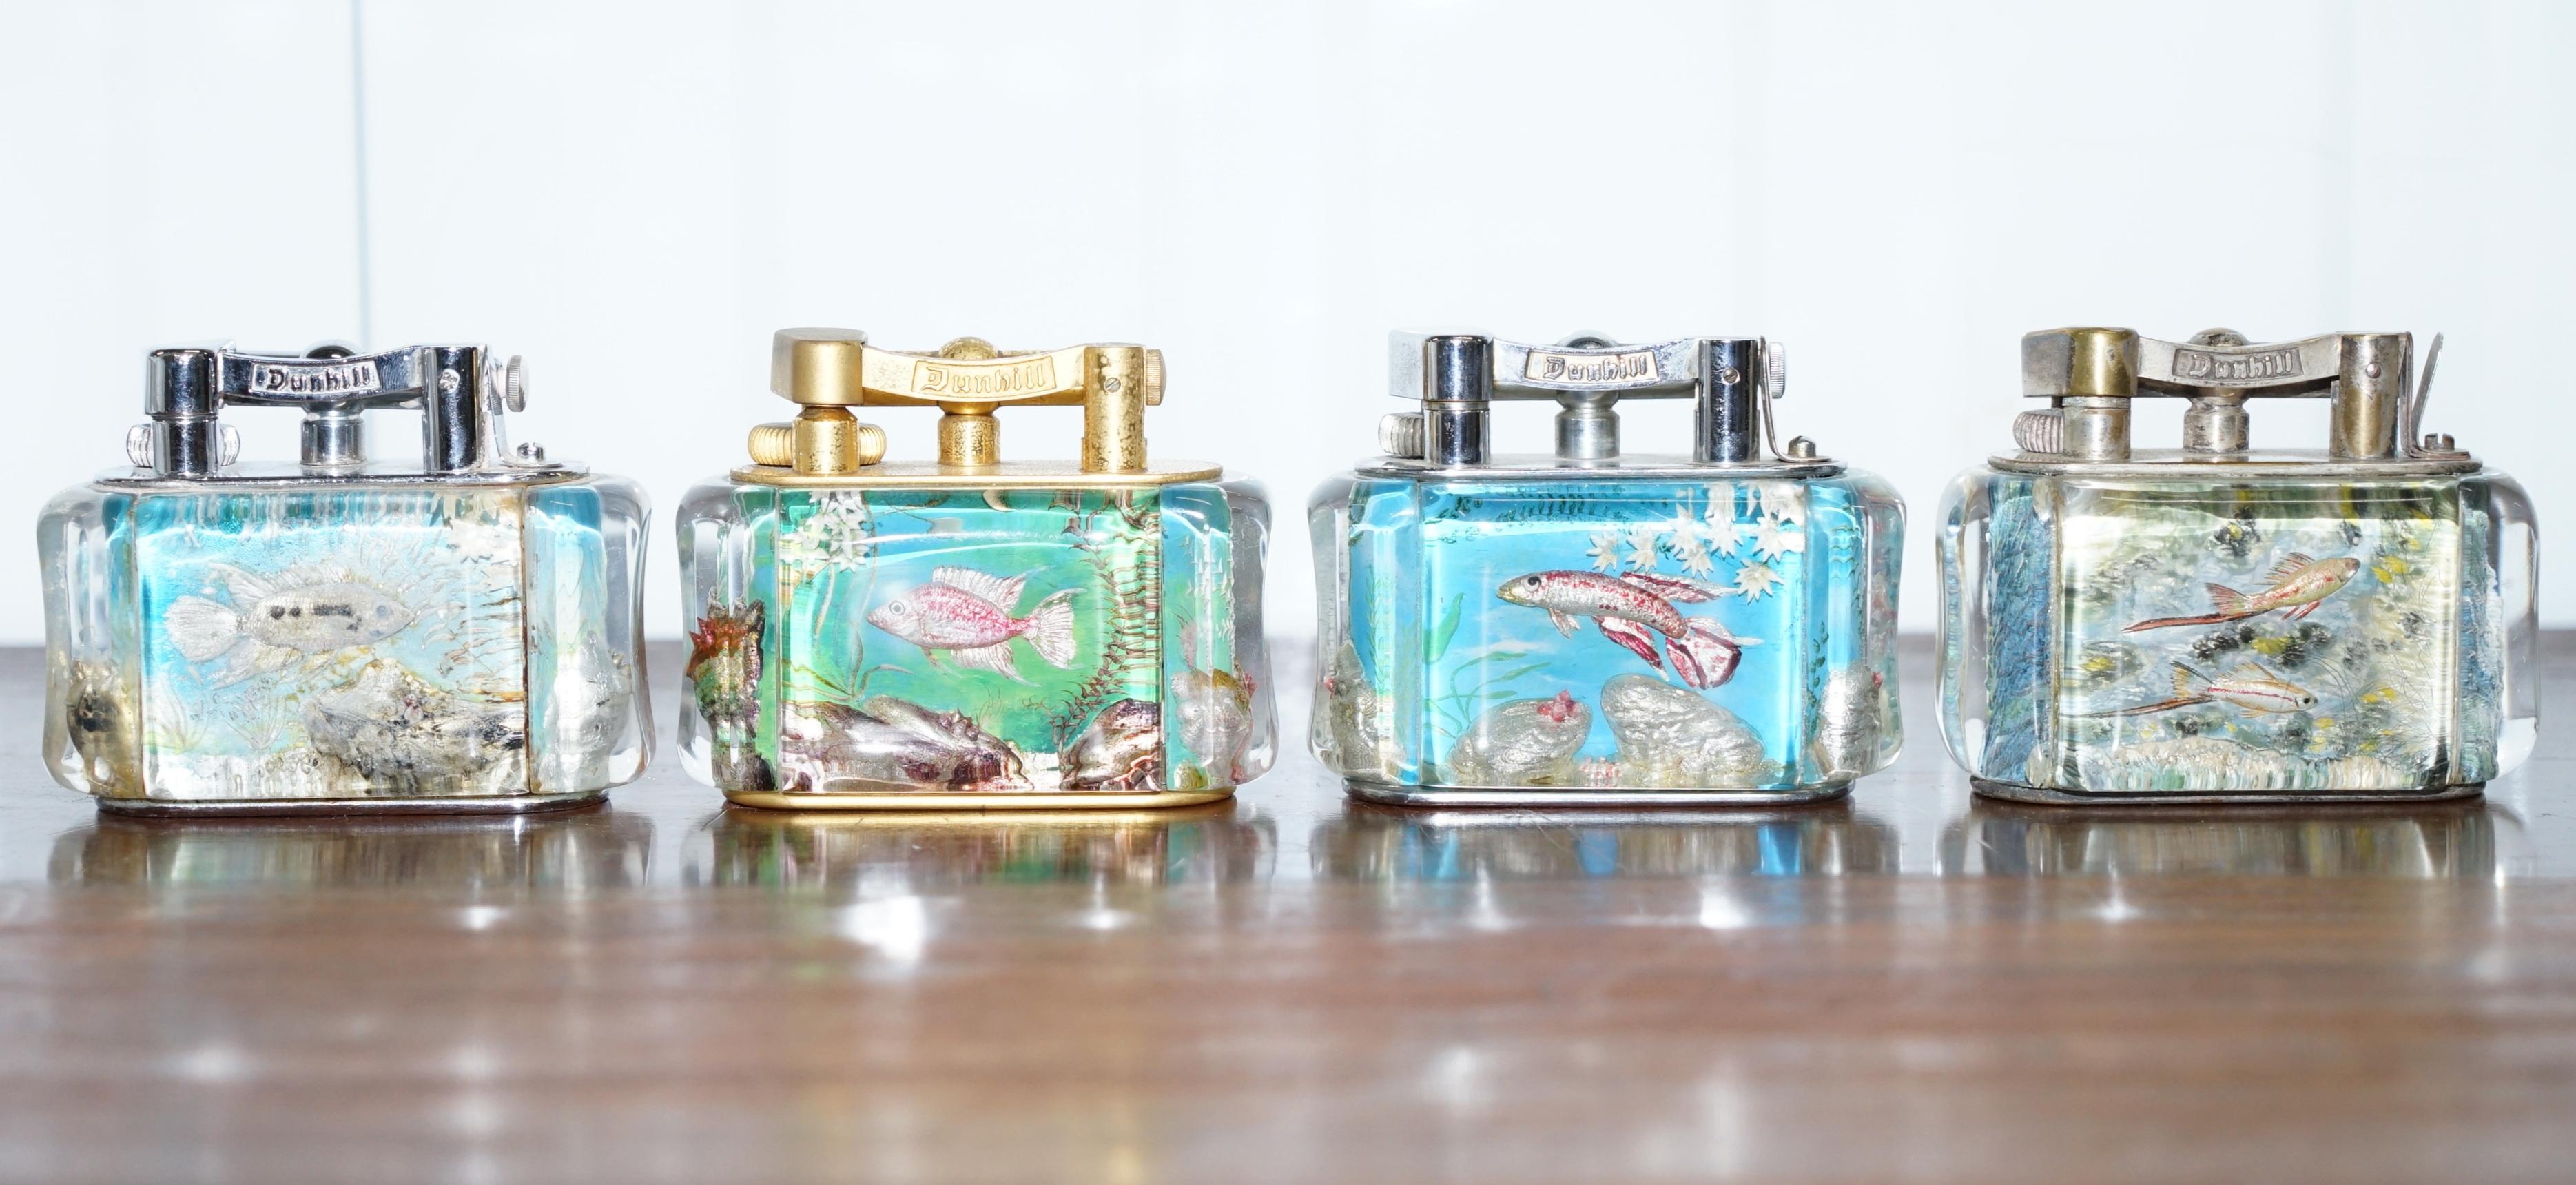 We are delighted to offer for sale is this very rare original 1950s handmade in England oversized Dunhill Aquarium table lighter

They are all exceptionally rare, each piece is a one-off handmade item that will never be replicated again, the